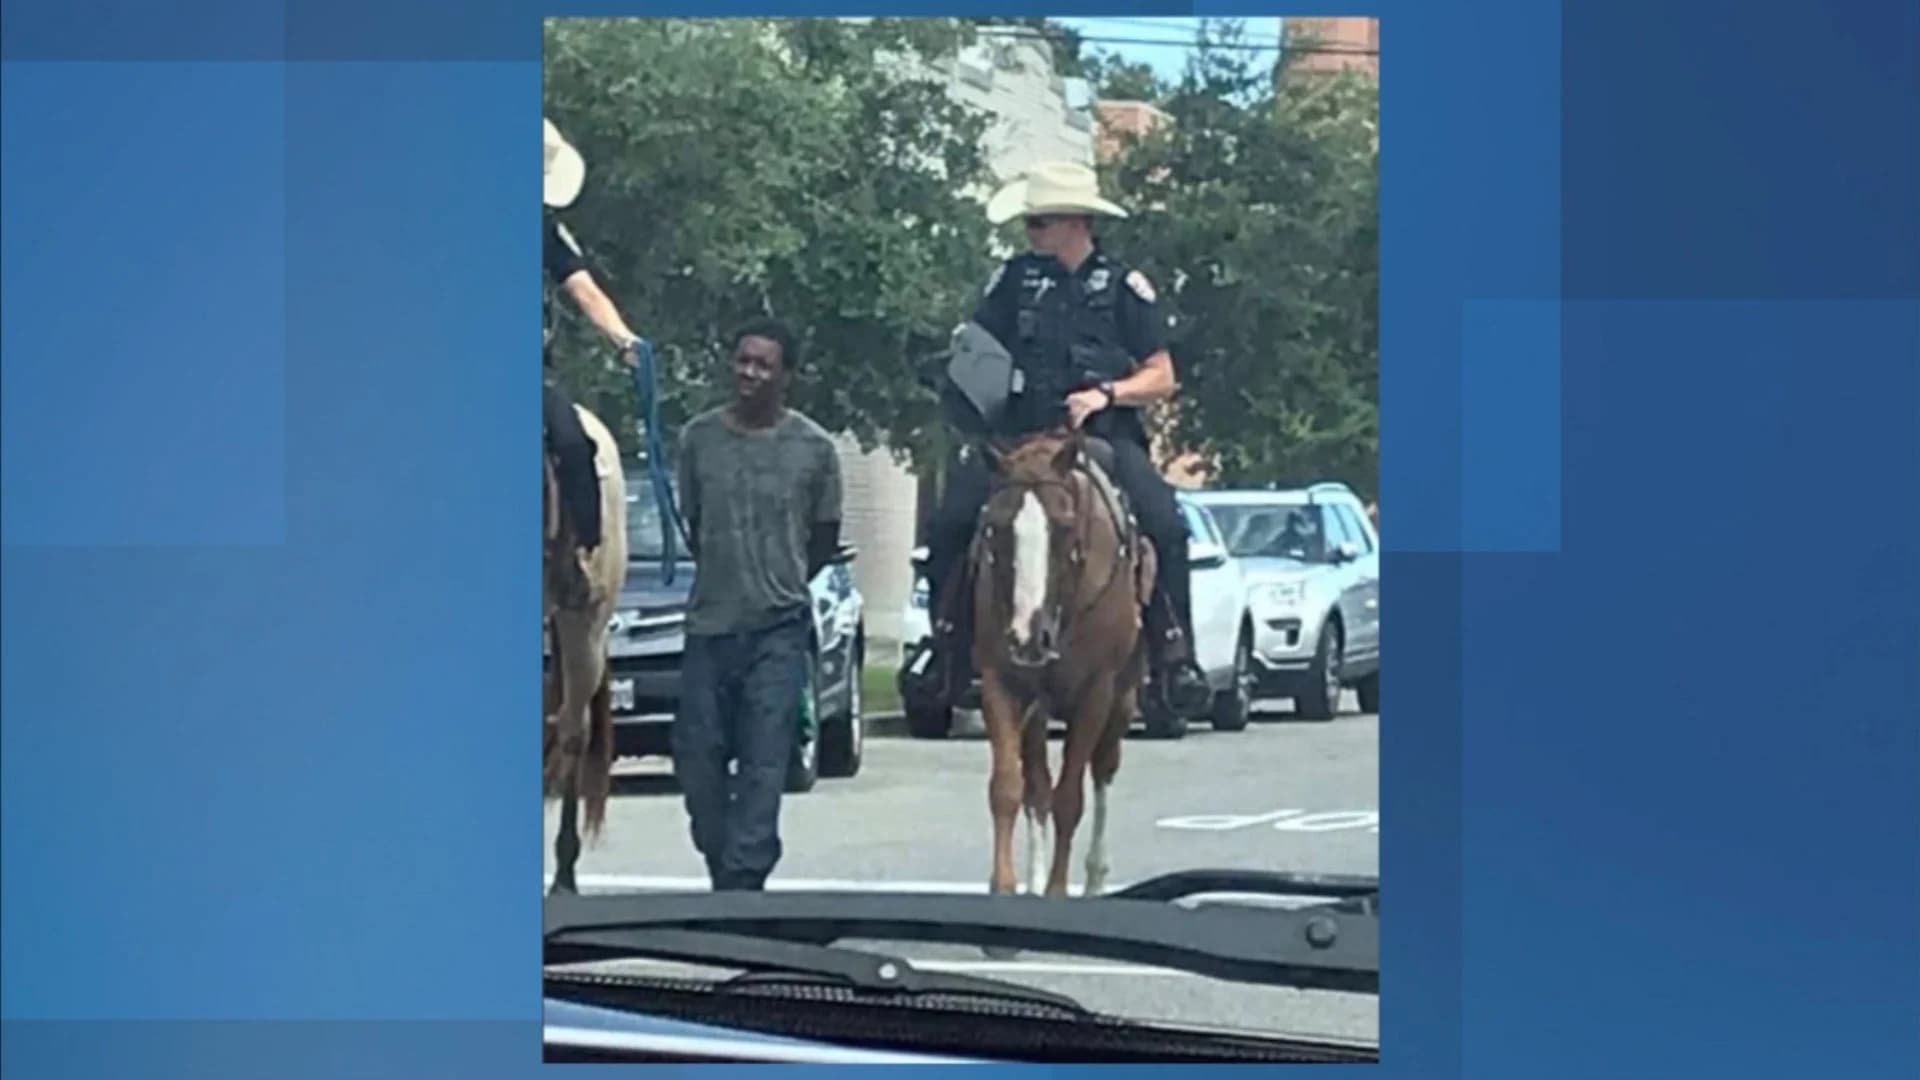 Texas police chief apologizes after horseback officers lead man by rope